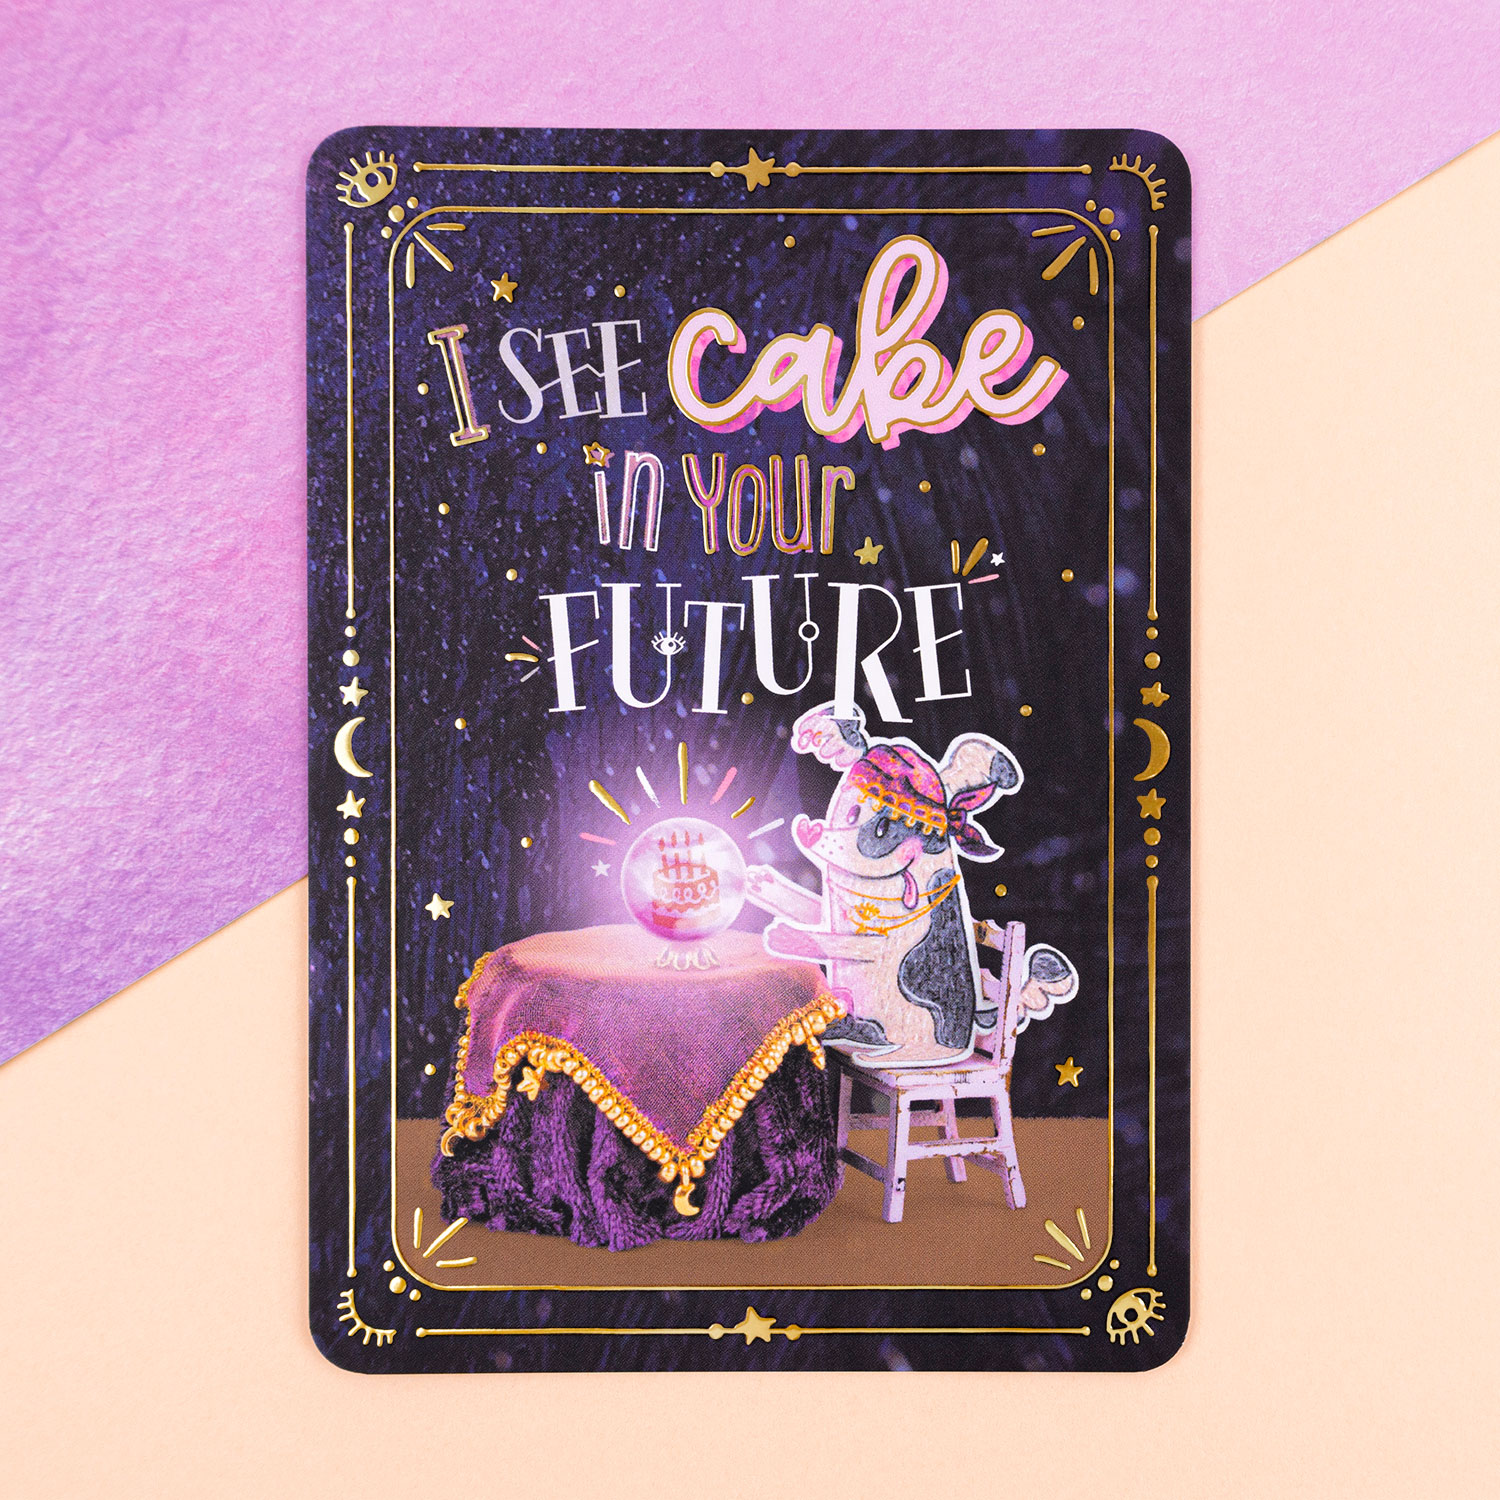 Postcard 'I see cake in your Future'